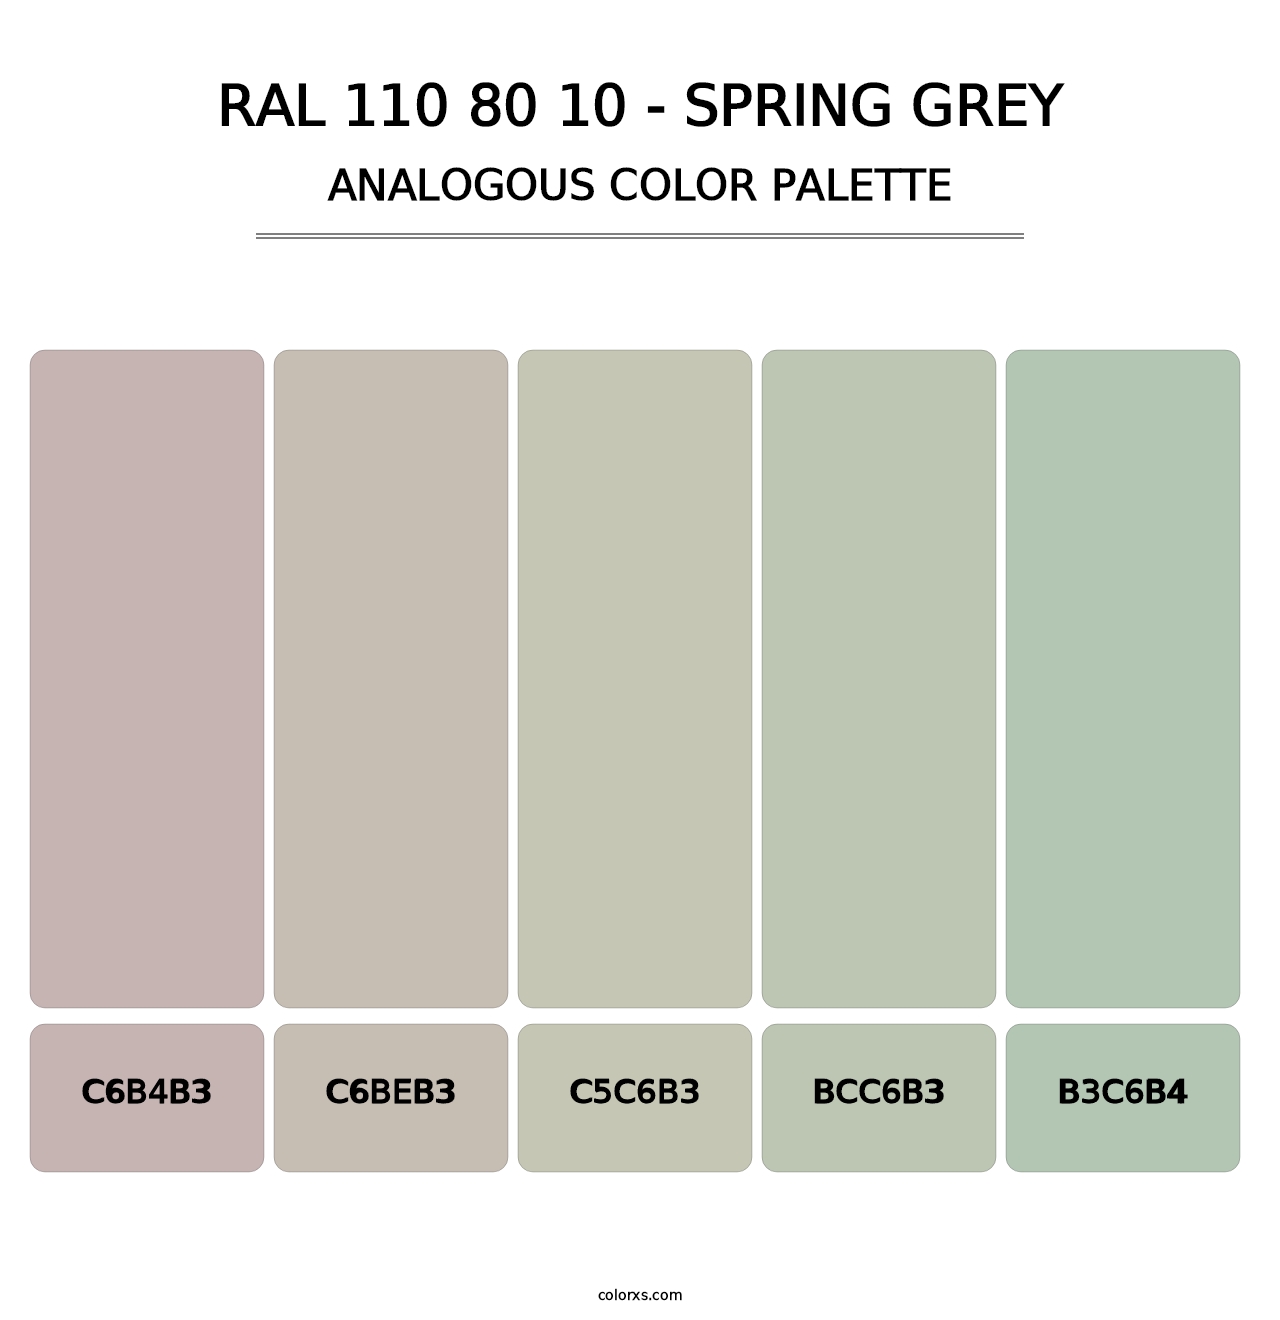 RAL 110 80 10 - Spring Grey - Analogous Color Palette